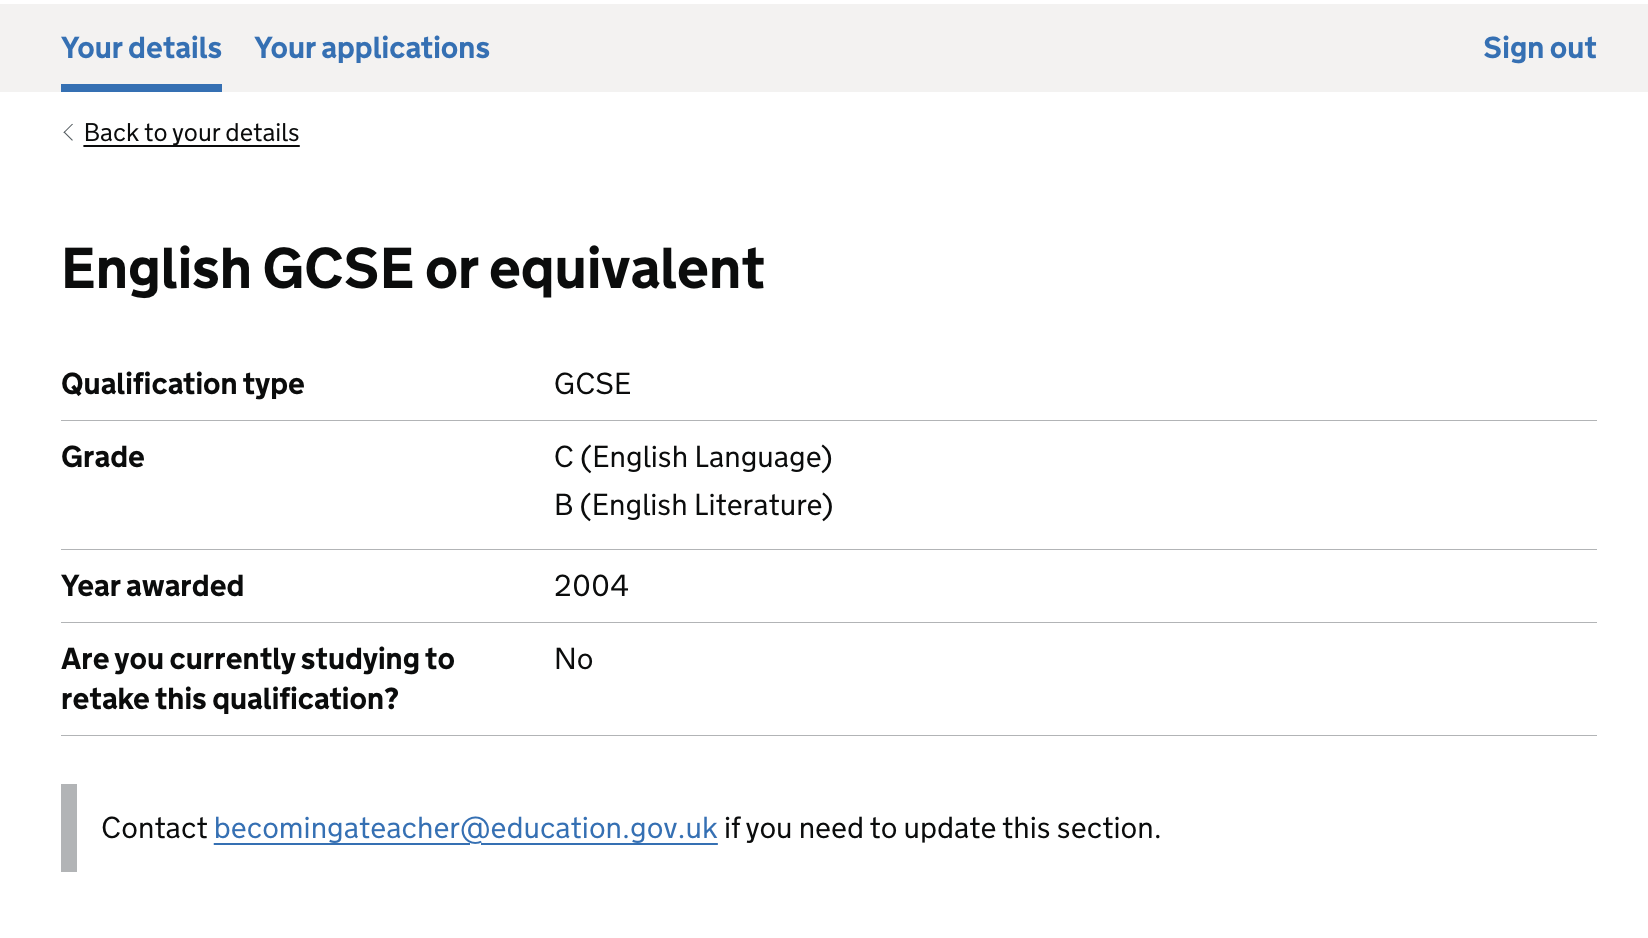 Screenshot of a summary screen called 'English GCSE or equivalent'. The screen shows information like qualifitcation type, grade, year awarded and if the user is currently studying. Below this list is a line of content that tells the user to contact support if they need to edit this information.